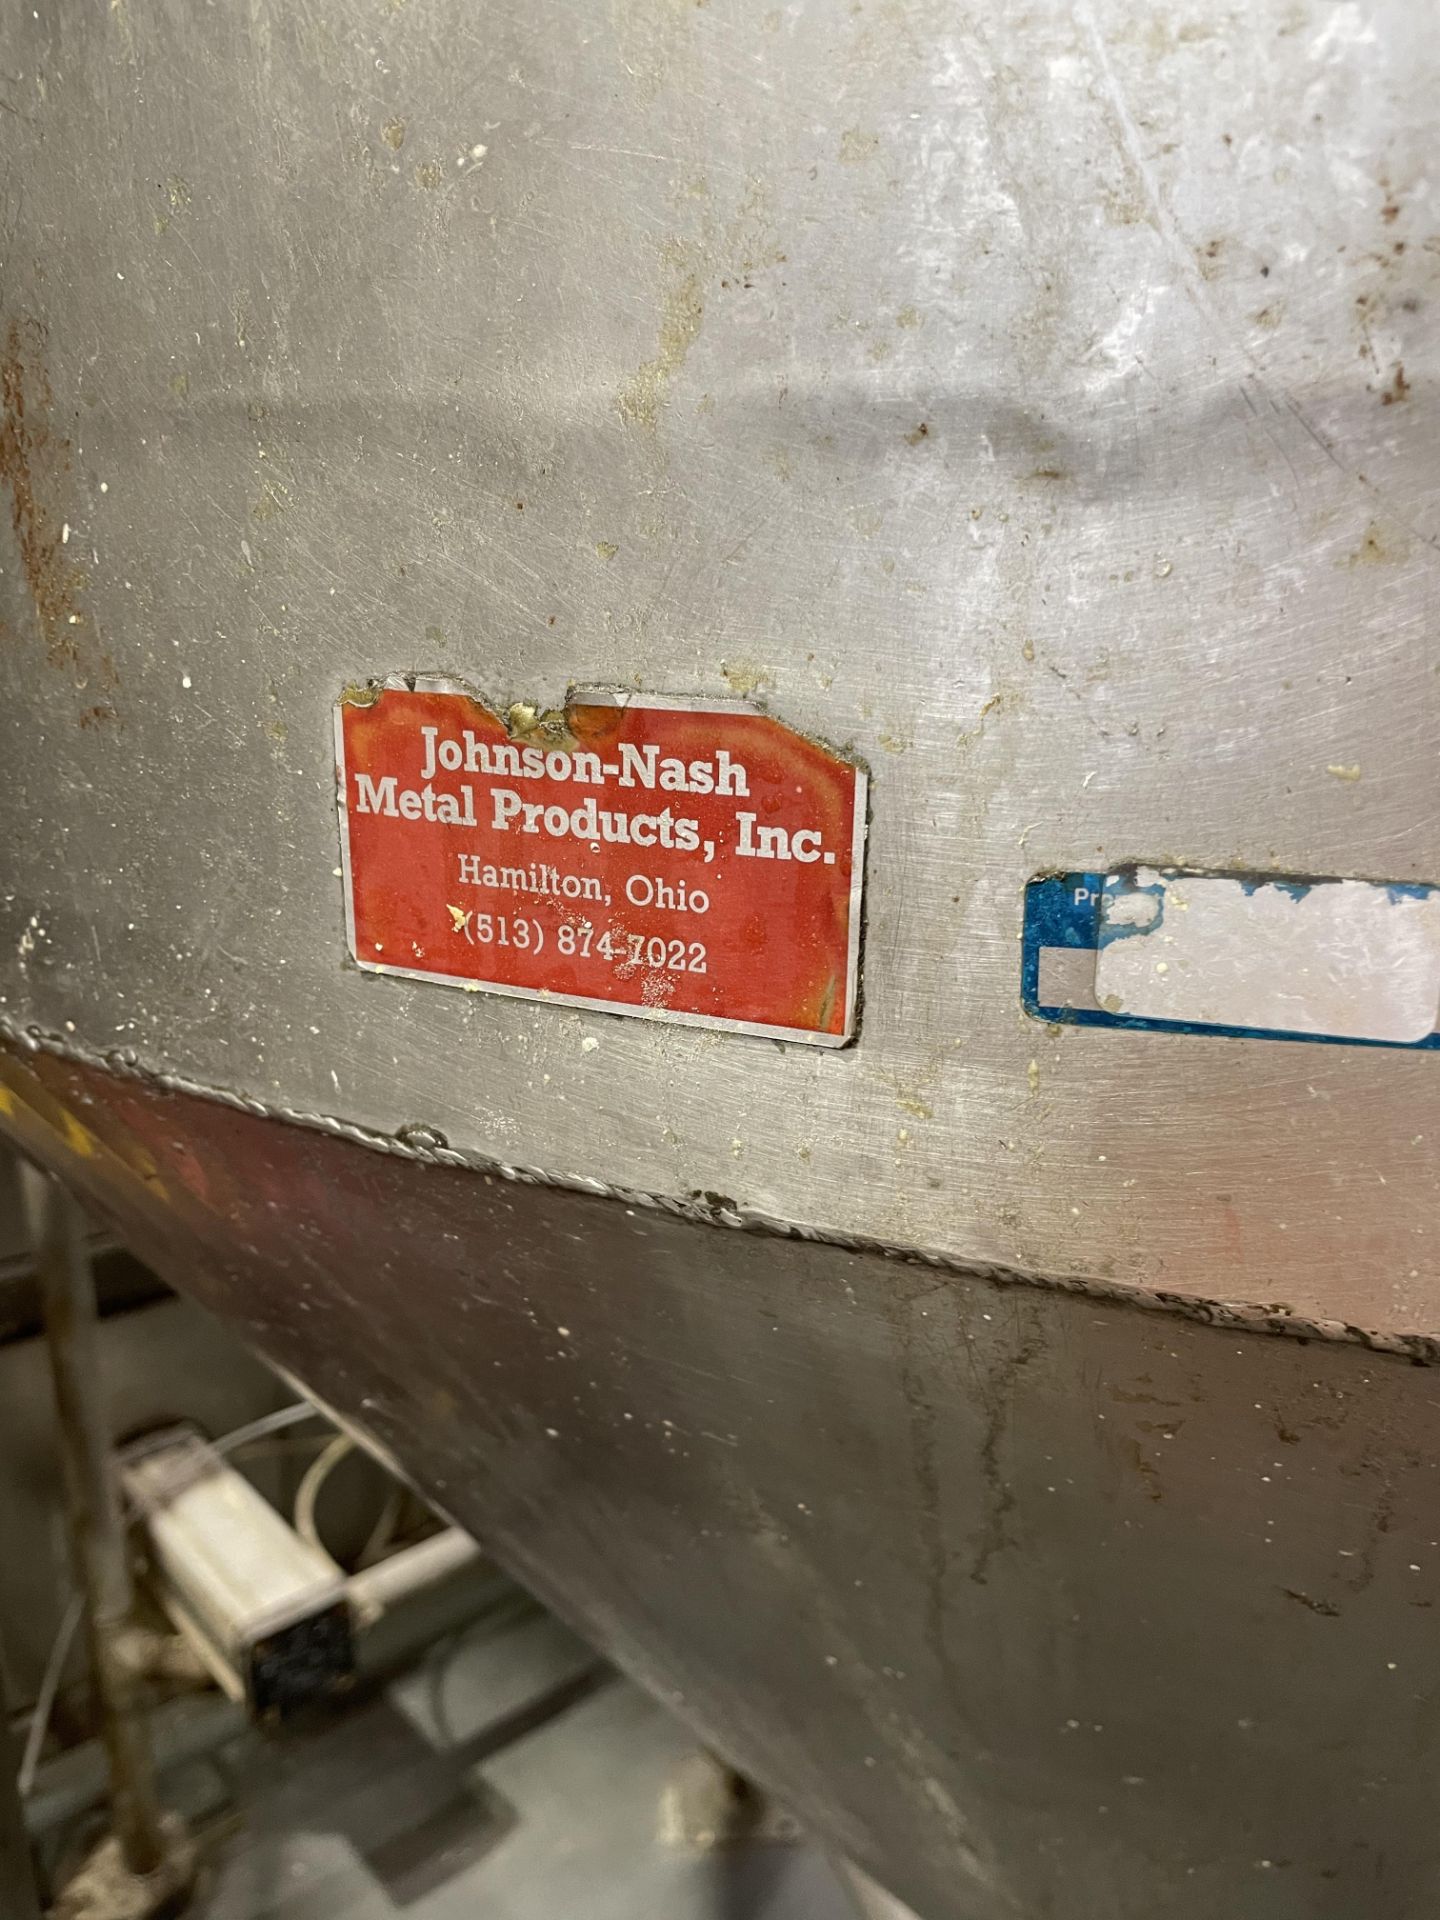 Johnson Nash Metal Products Hopper Tank to Feed Oakes Mixer, Loading Fee: $1100 - Image 4 of 5